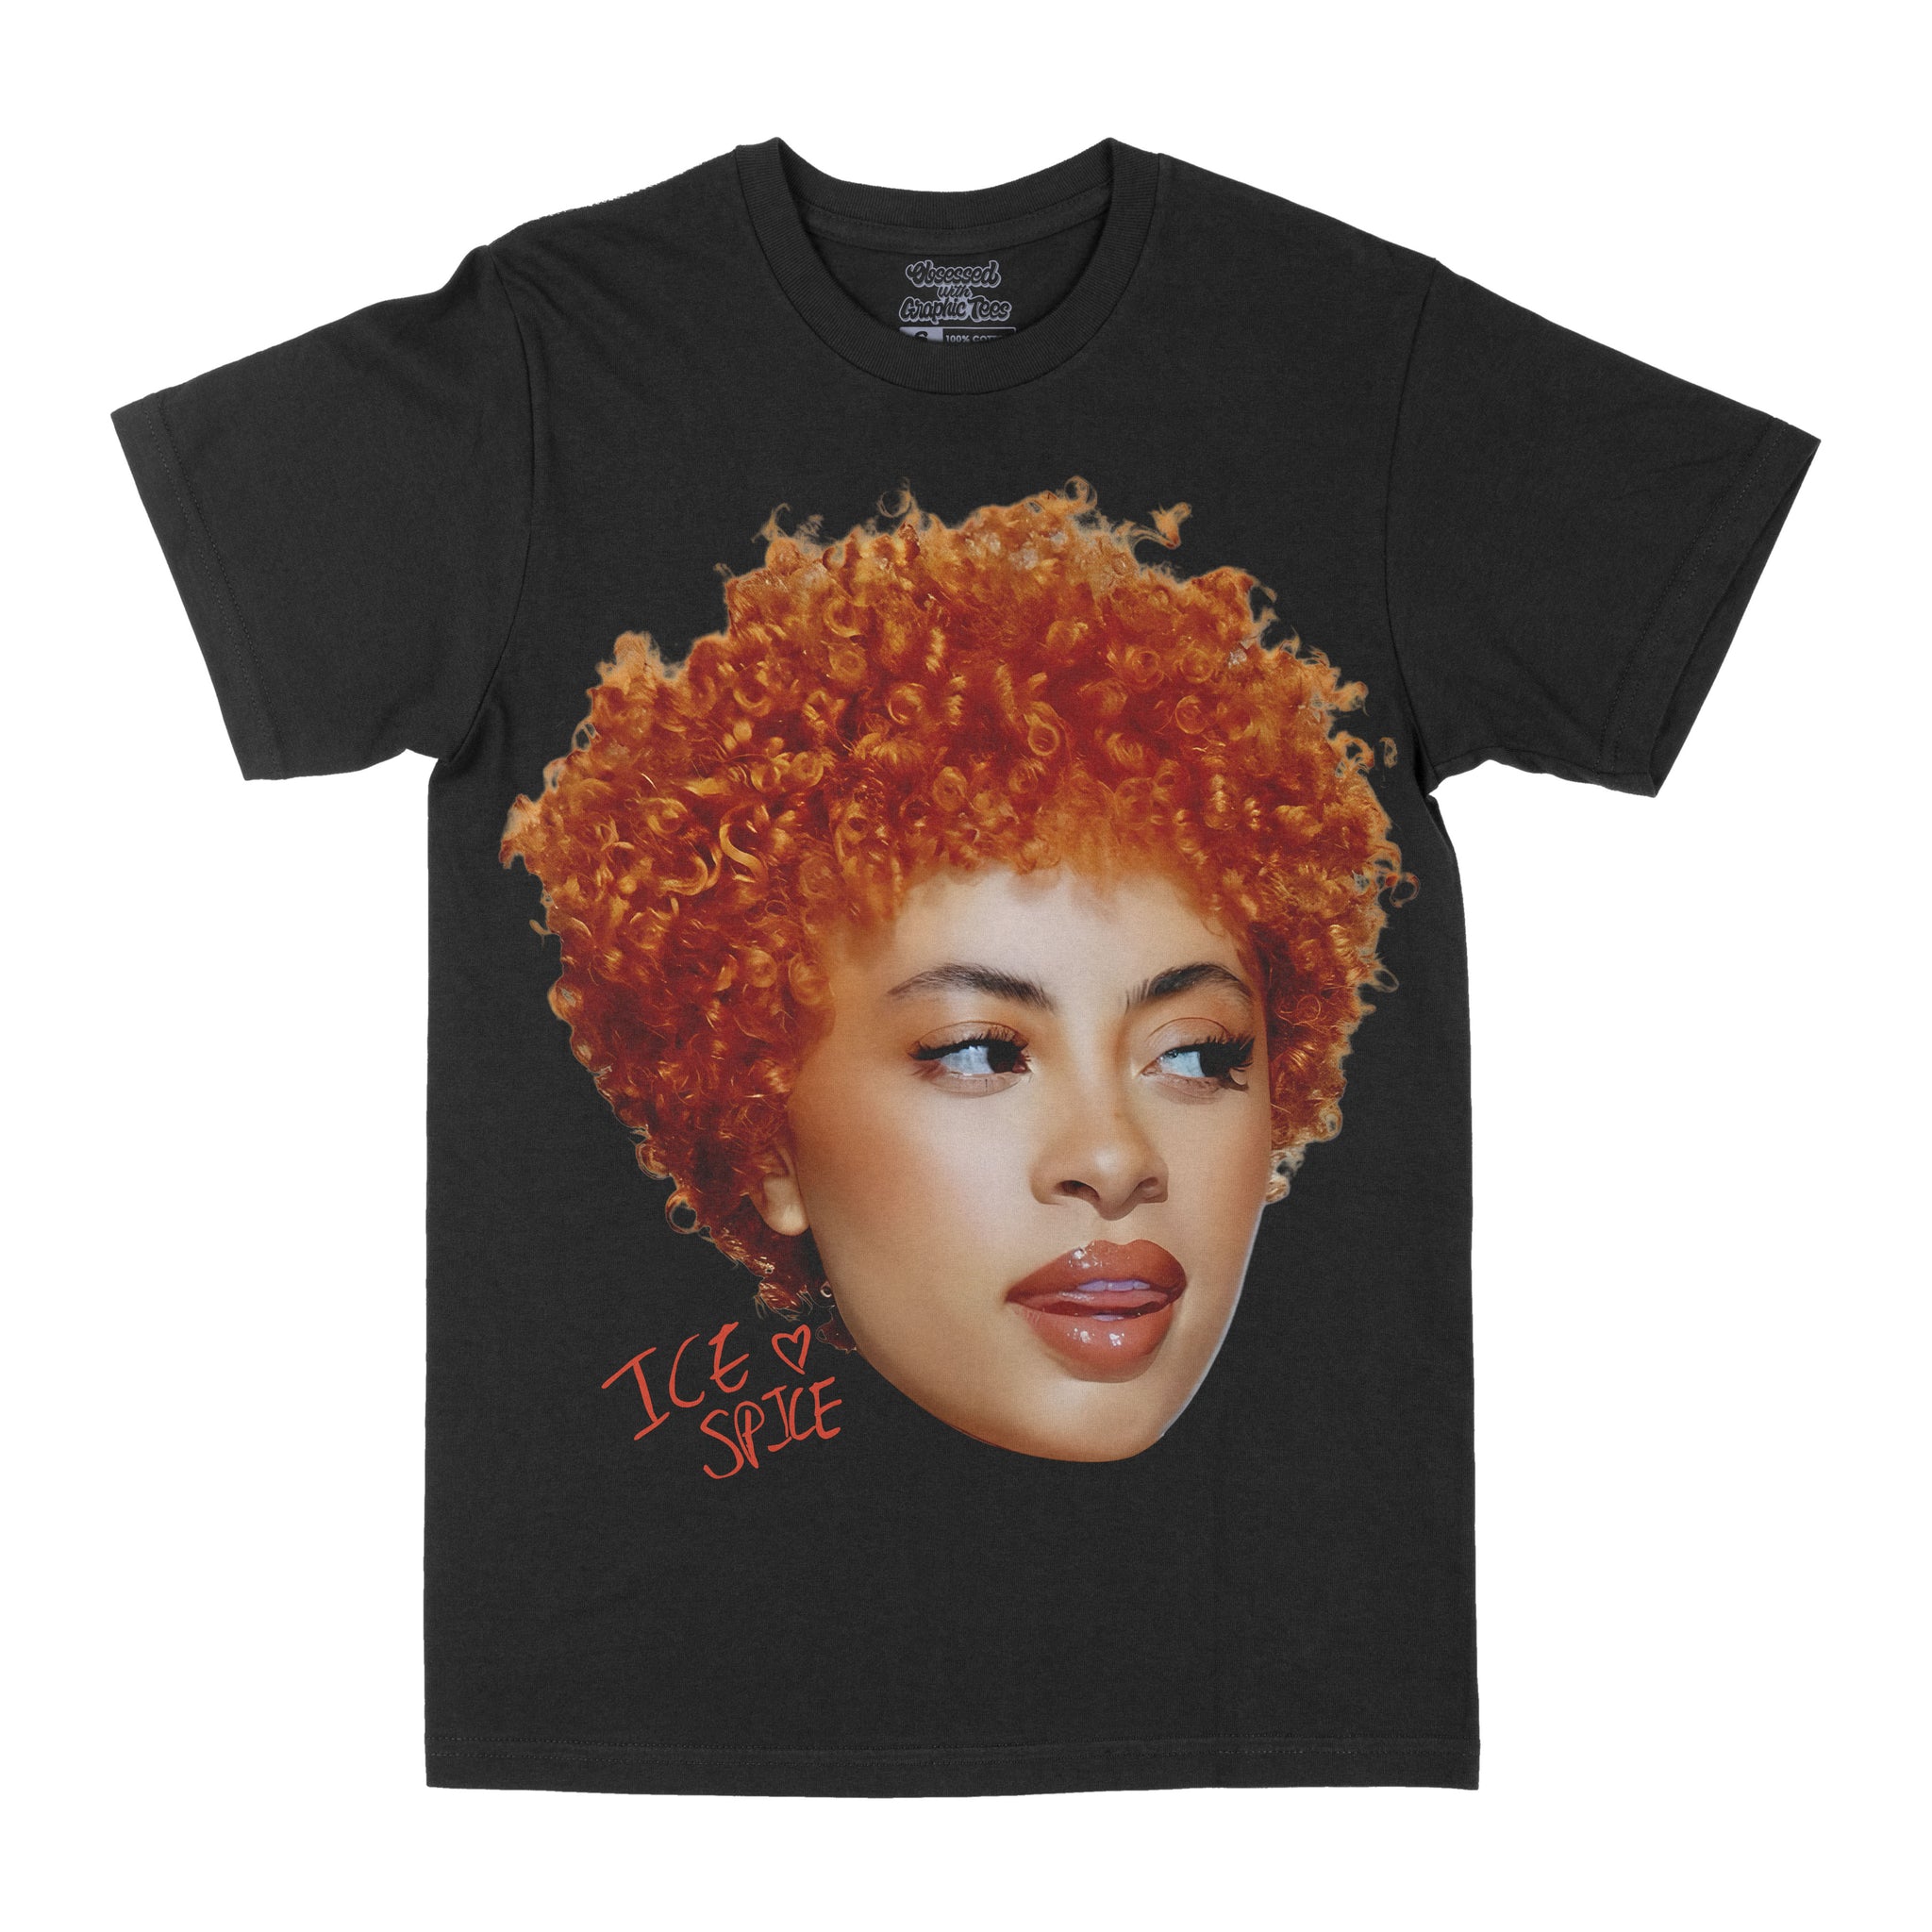 Ice Spice "Big Face" Graphic Tee